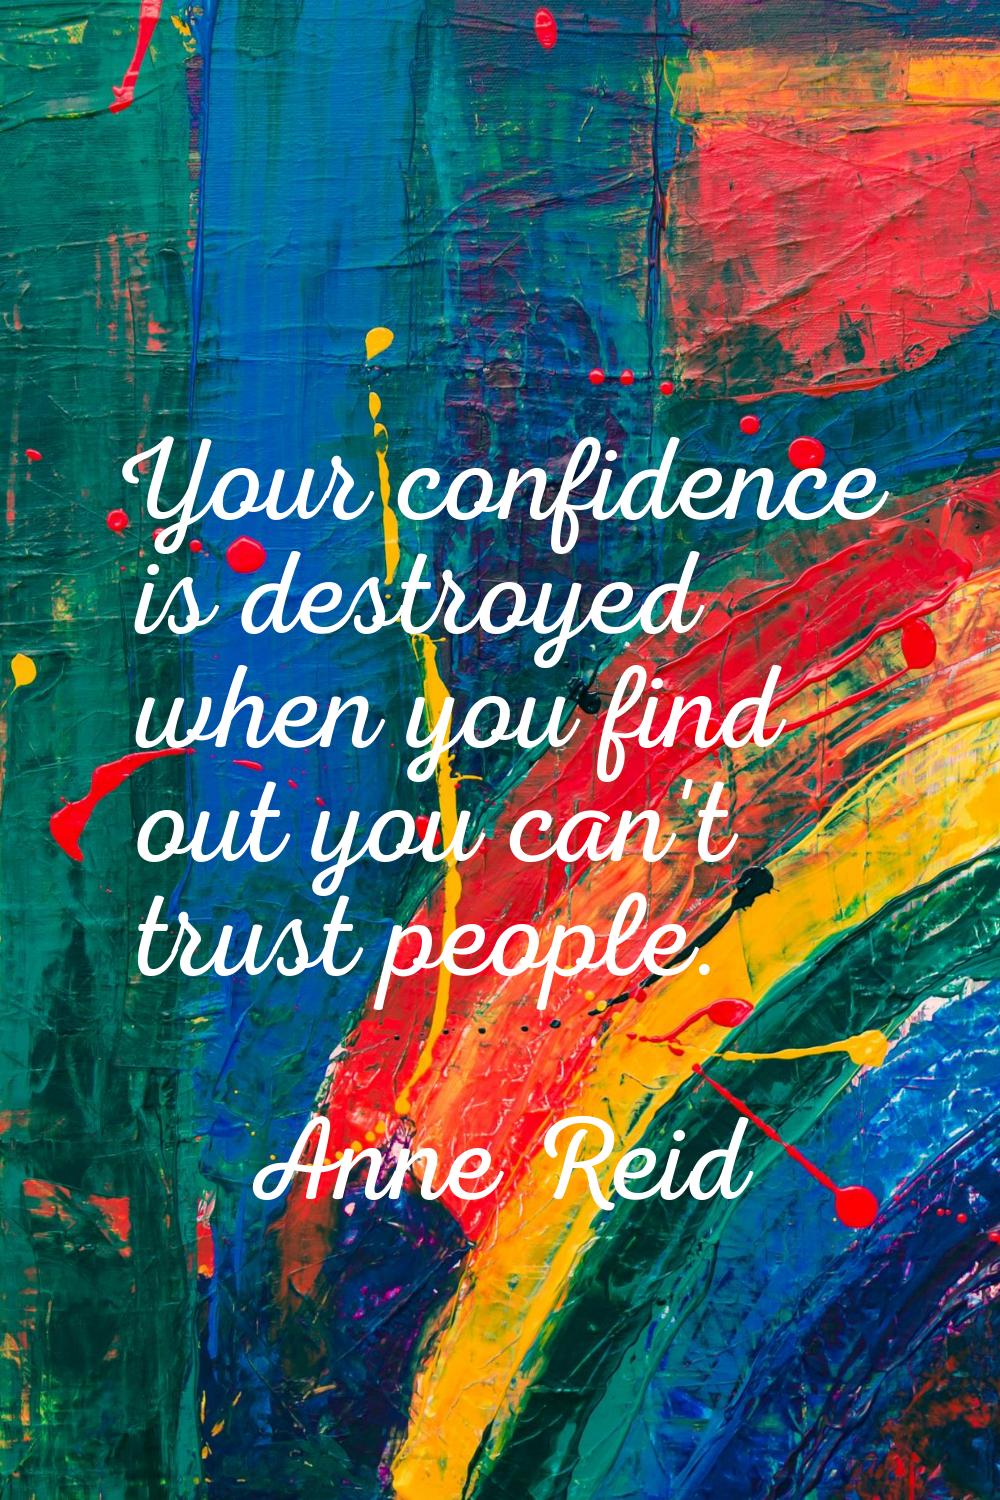 Your confidence is destroyed when you find out you can't trust people.